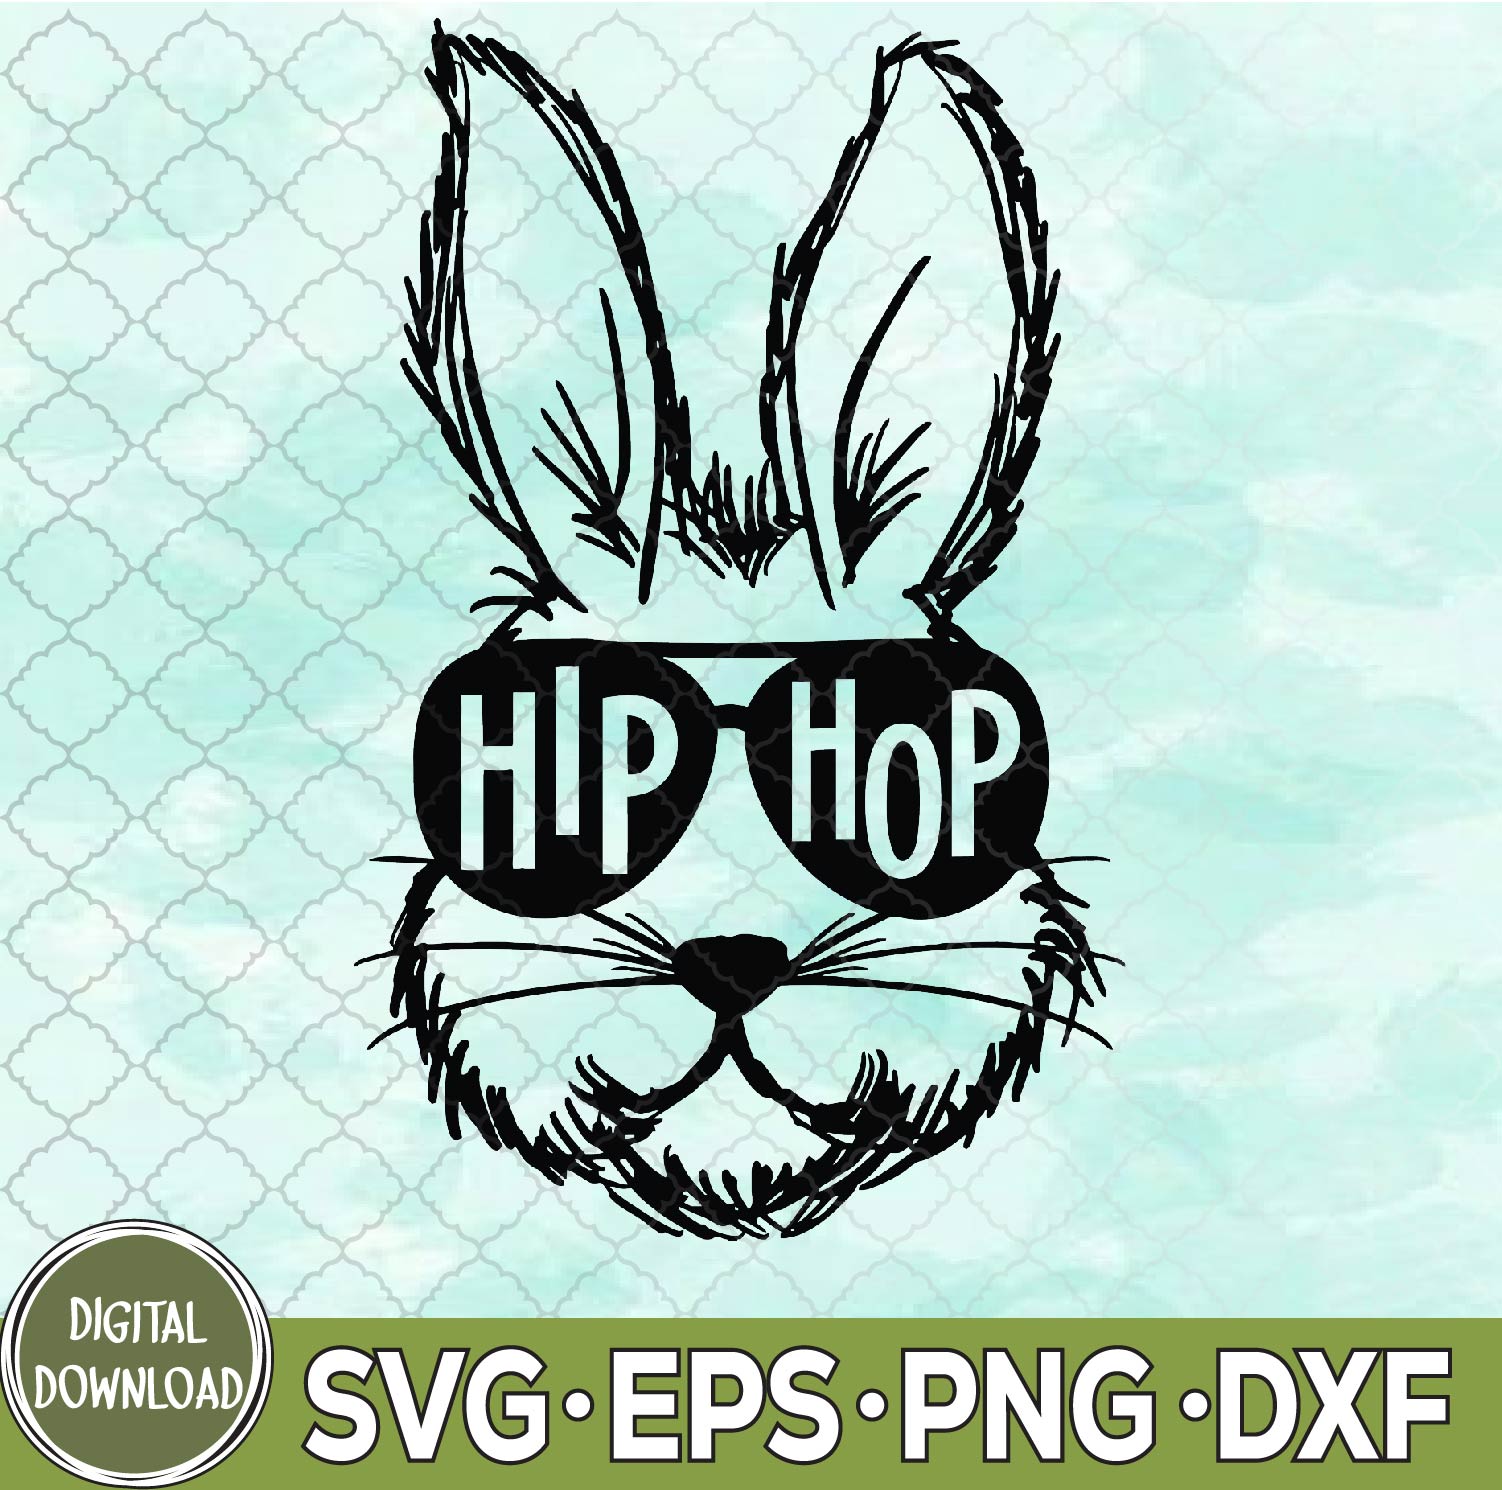 WTMNEW9file 09 109 Hip Hop Happy Easter Bunny Face With Sunglasses Svg, Hip Hop Svg, Easter Bunny Sunglasses Svg, Easter Svg, Eps, Png, Dxf